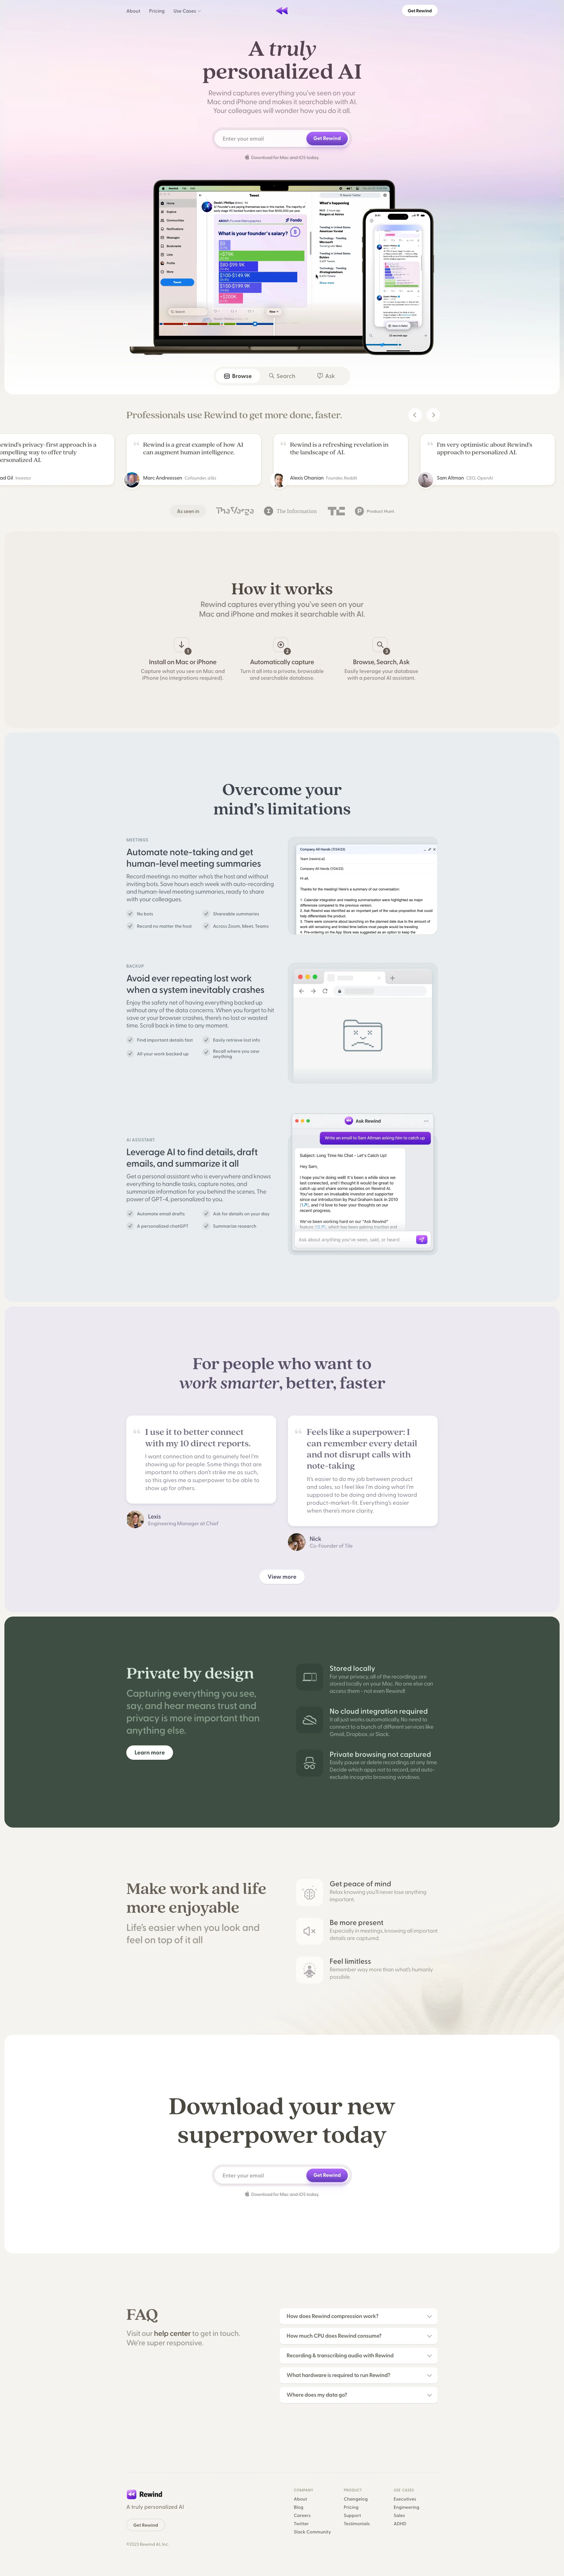 Rewind Landing Page Example: A truly personalized AI. Rewind captures everything you’ve seen on your Mac and iPhone and makes it searchable with AI. Your colleagues will wonder how you do it all.